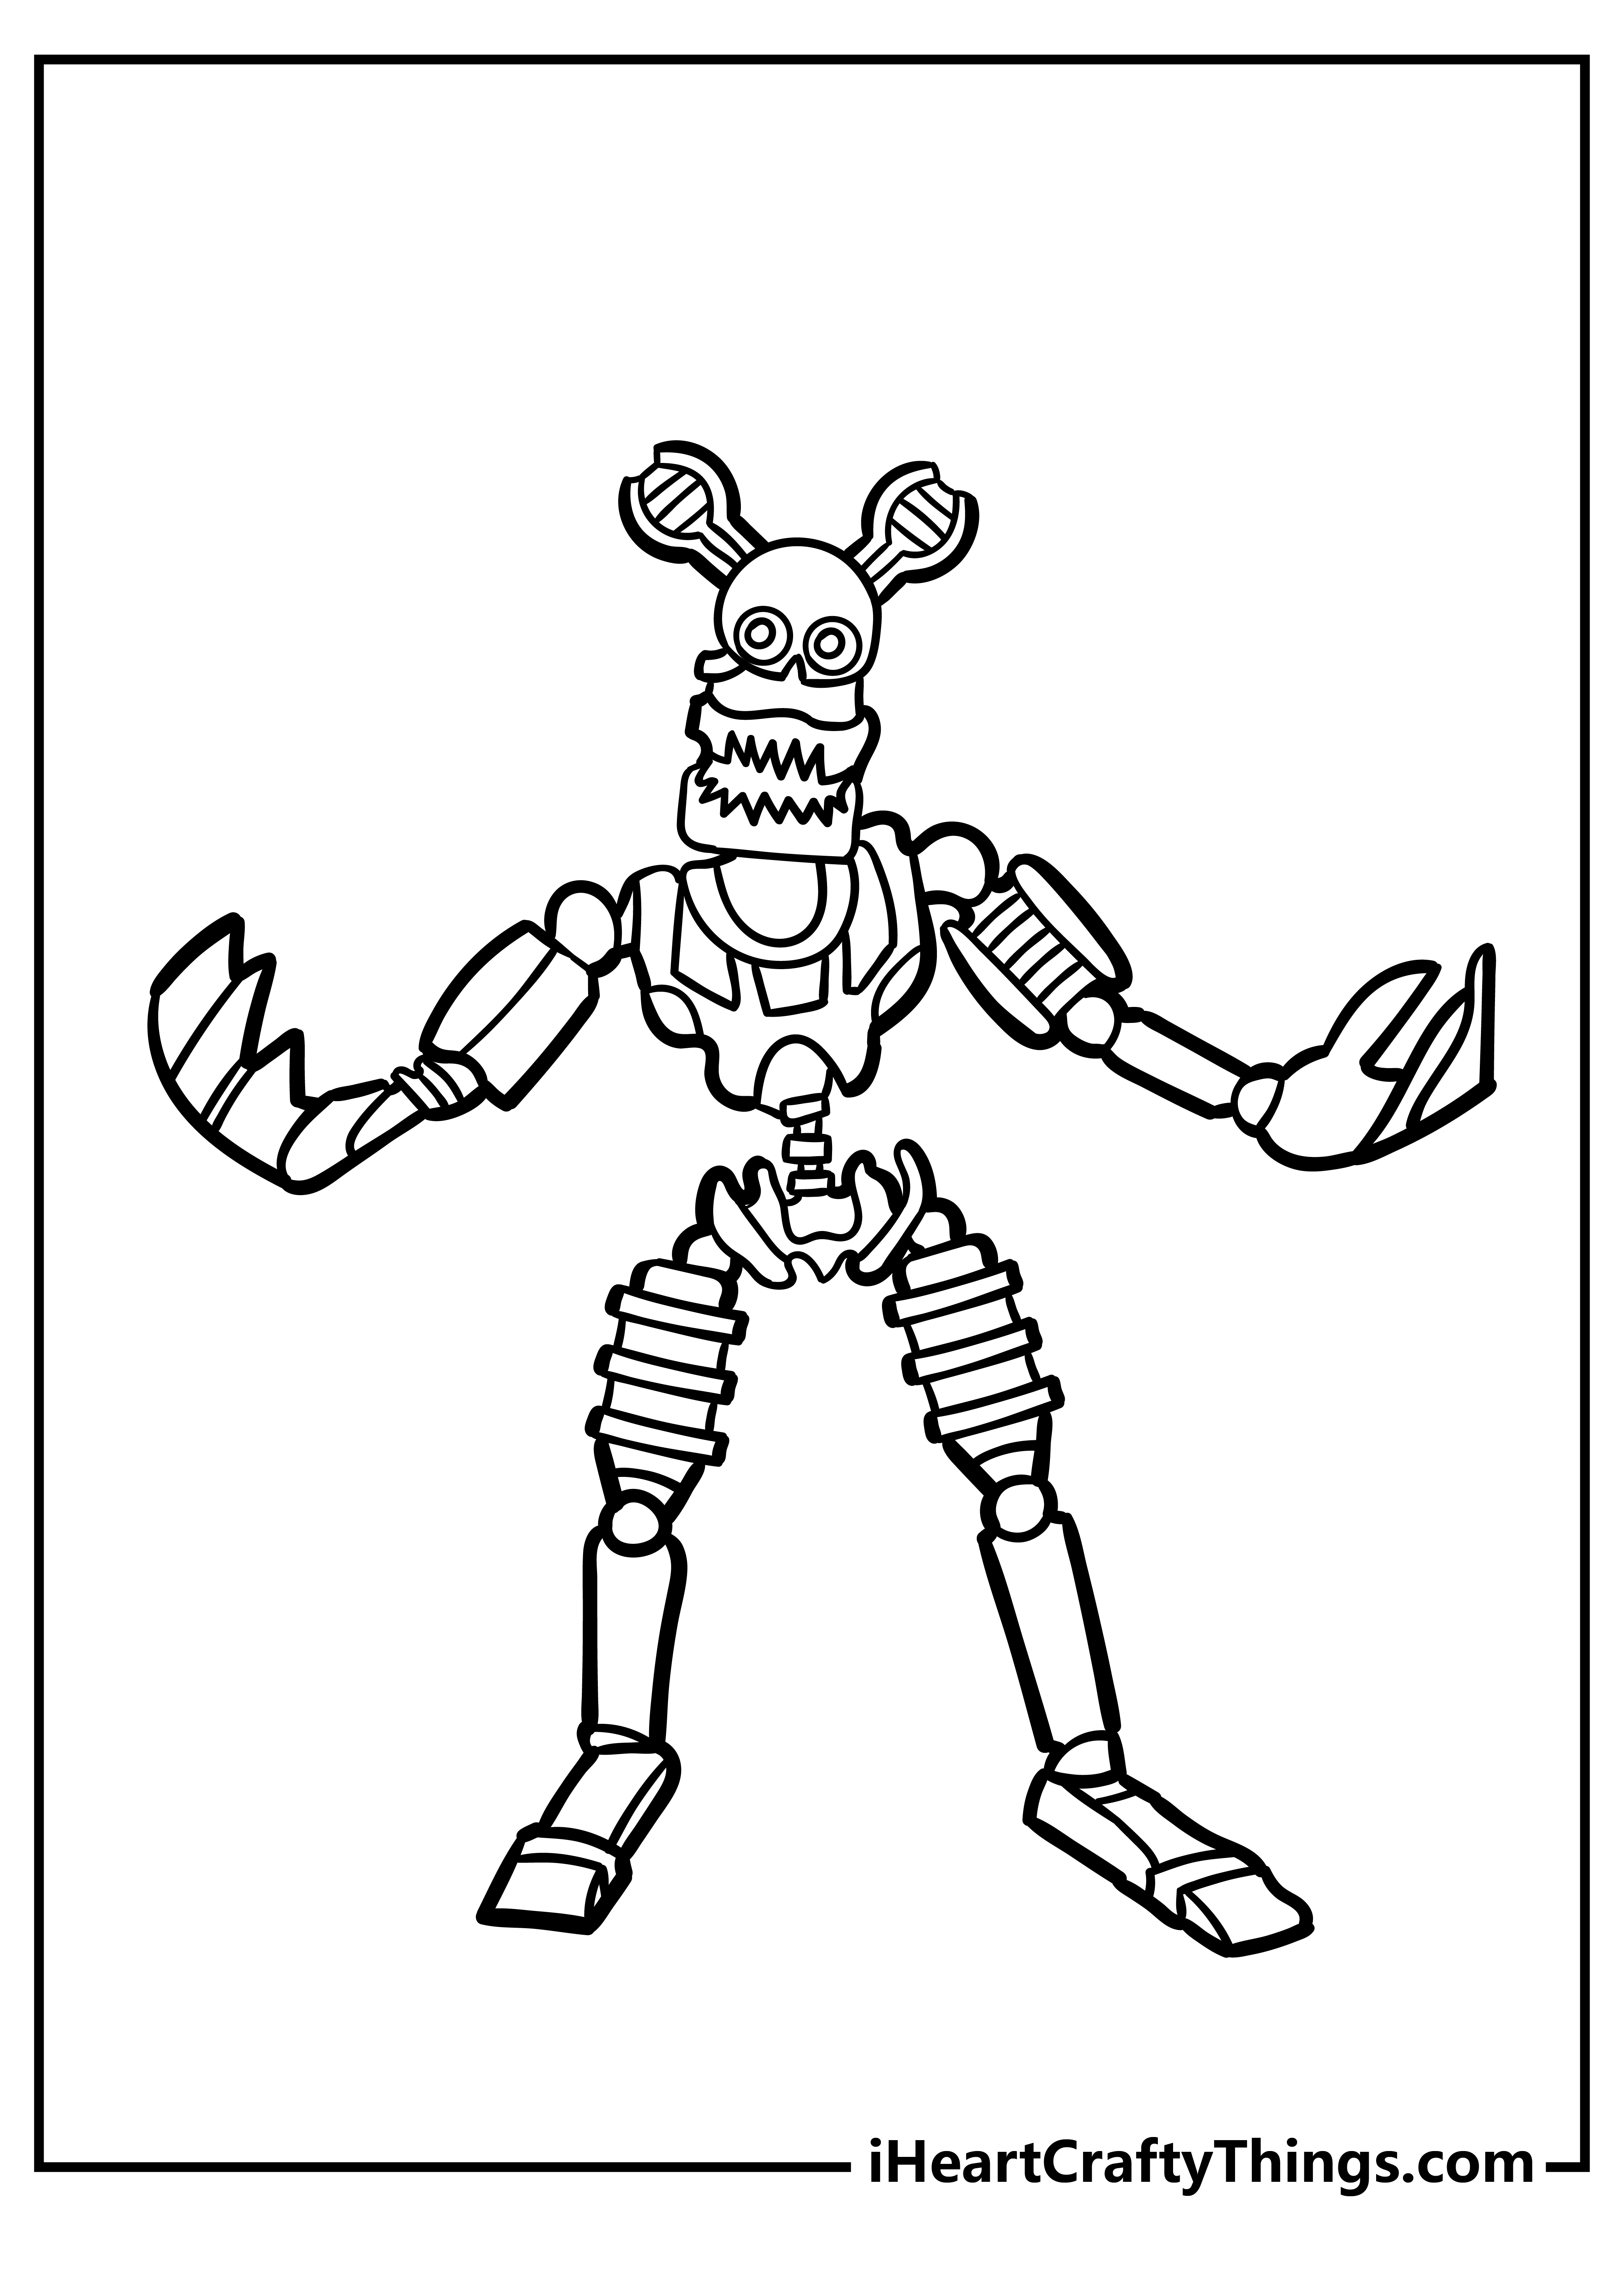 Free Printable Five Nights at Freddy's FNAF Coloring Pages